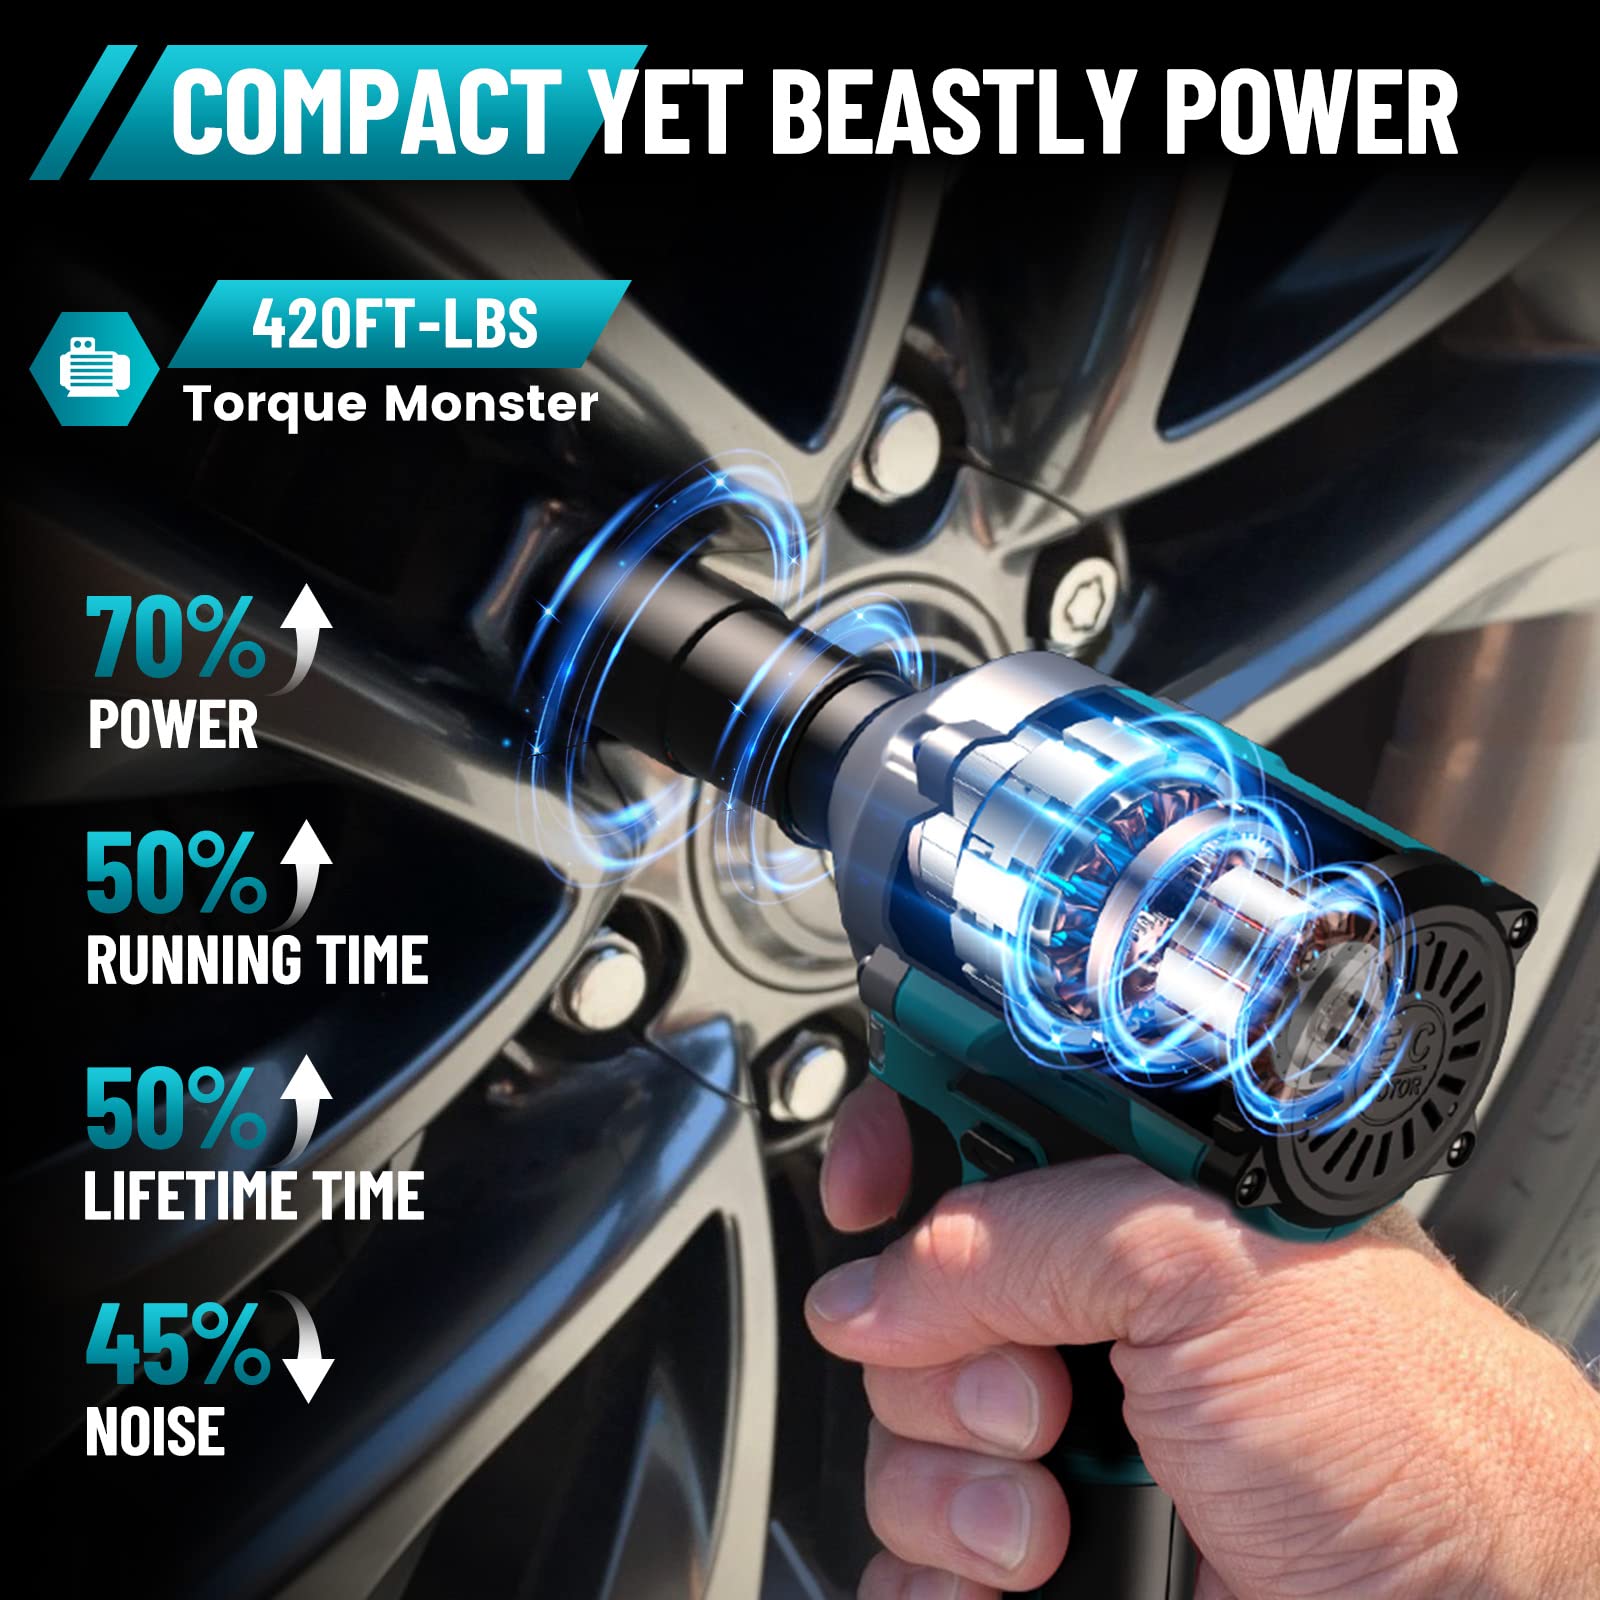 Uaoaii Cordless Impact Wrench Compact Size, 1/2 Power Impact Gun Brushless 420 ft-lbs (550N.m) w/ 4.0A Li-ion Battery, Fast Charger, Sockets, Drill & Screw Bits, 3 in 1 Multi-Function